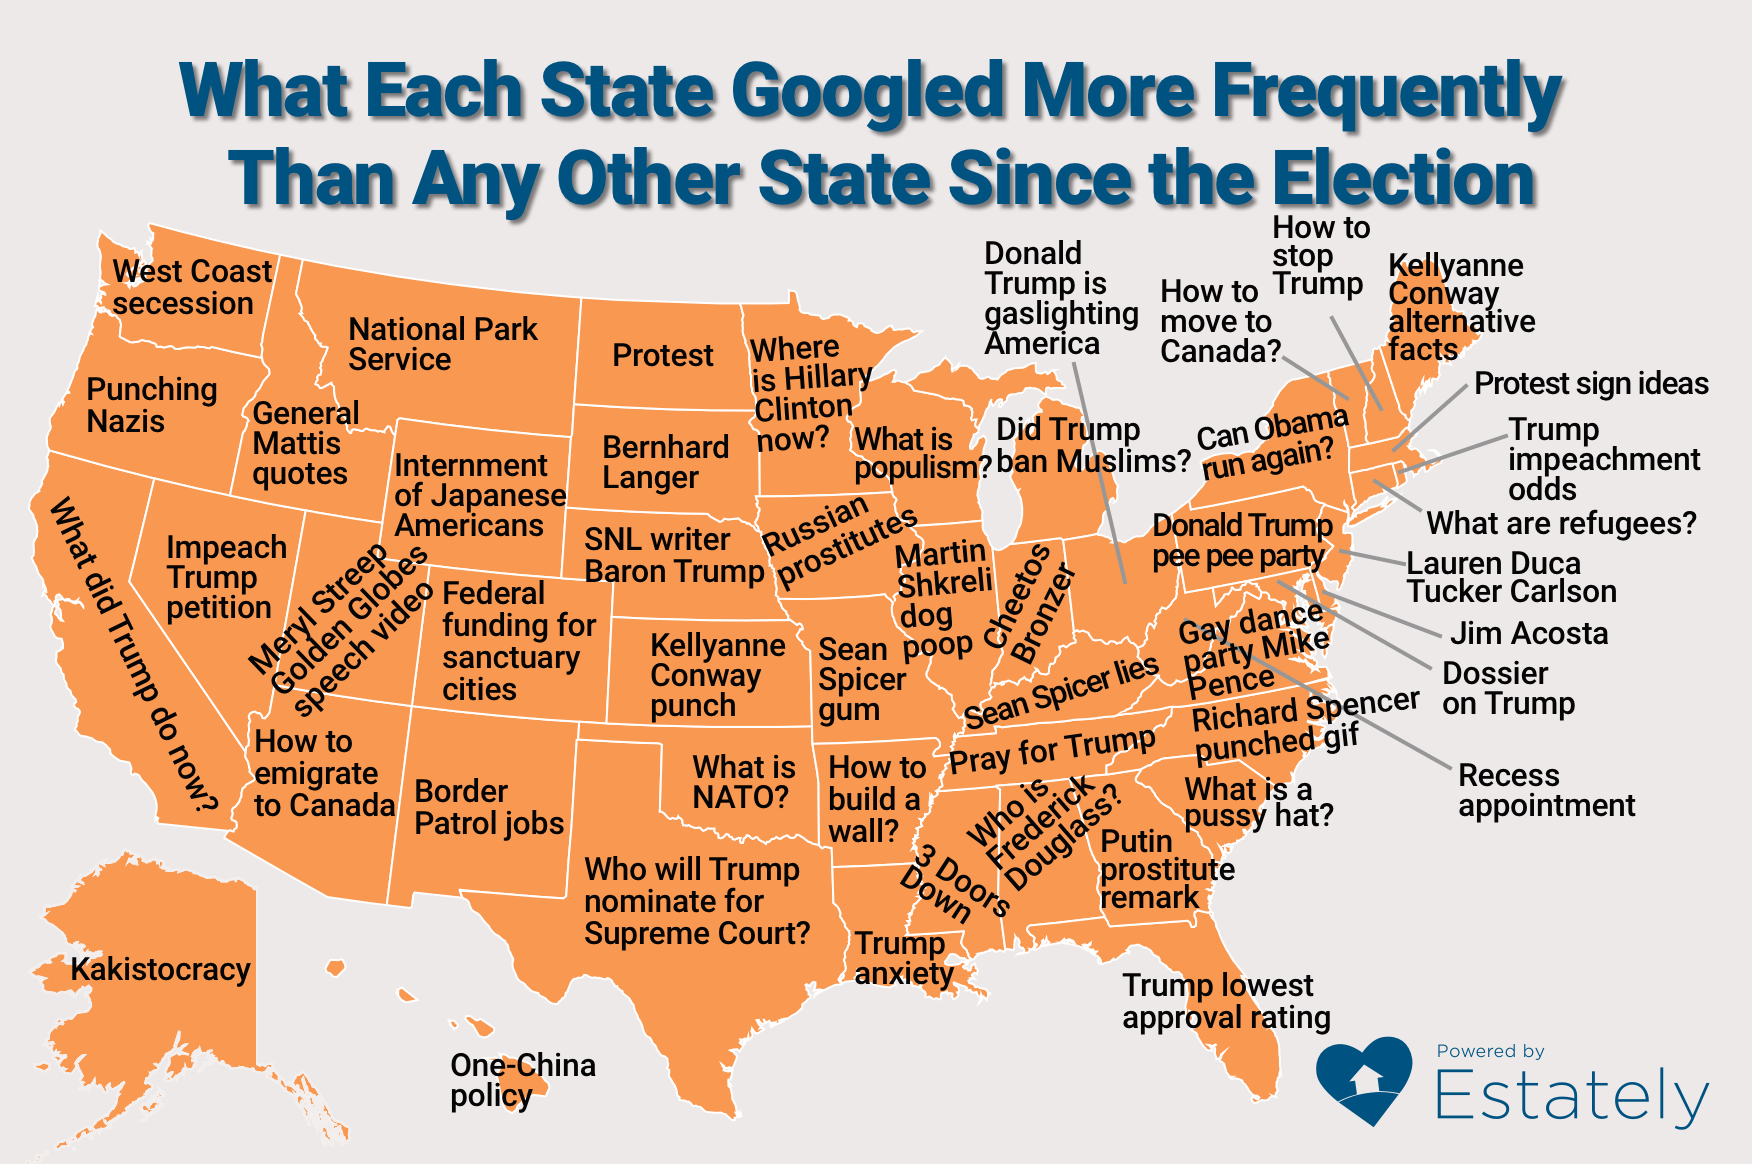 What Each State Googled More Frequently Than Any Other State Since The Election - Pennsylvania: Donald Trump pee pee party